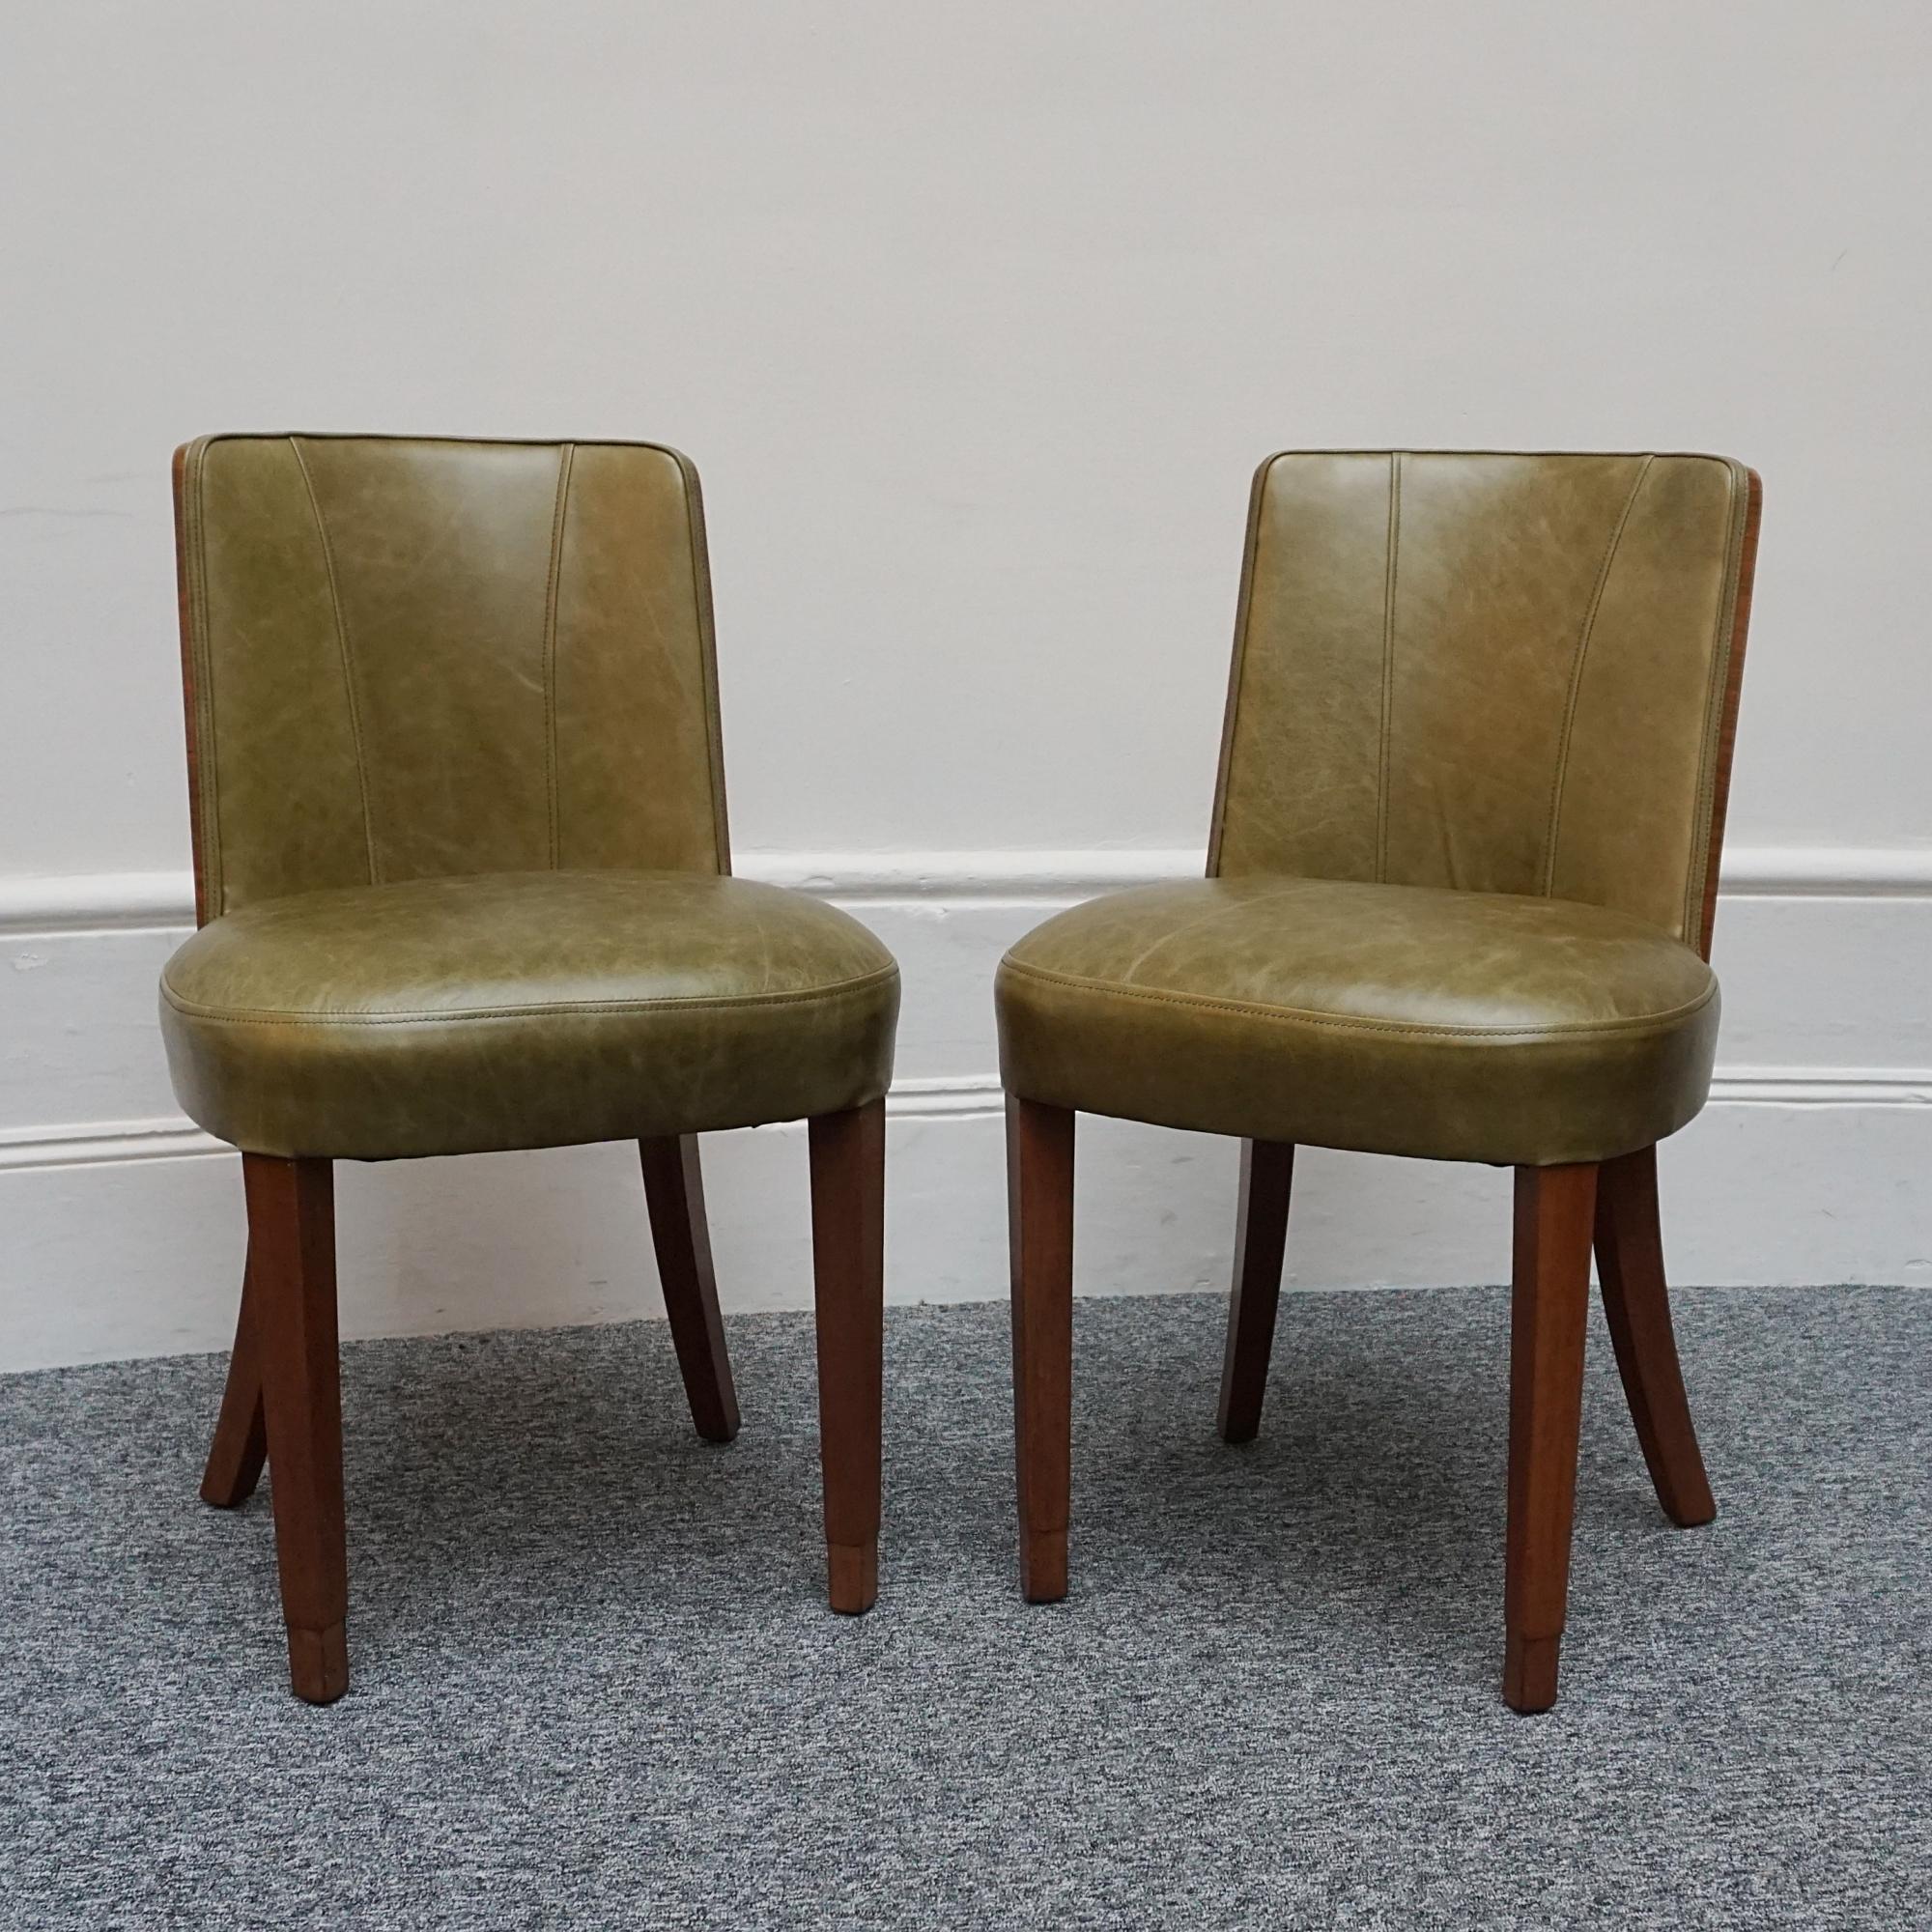 A pair of Art Deco side chairs. Contrasting figured walnut veneered backs with solid walnut legs. Re-upholstered in olive green leather. 

Two pairs available.

Dimensions: H 82cm W 49cm D 42cm Seat H 49cm 

Origin: English

Date: Circa 1935

Item